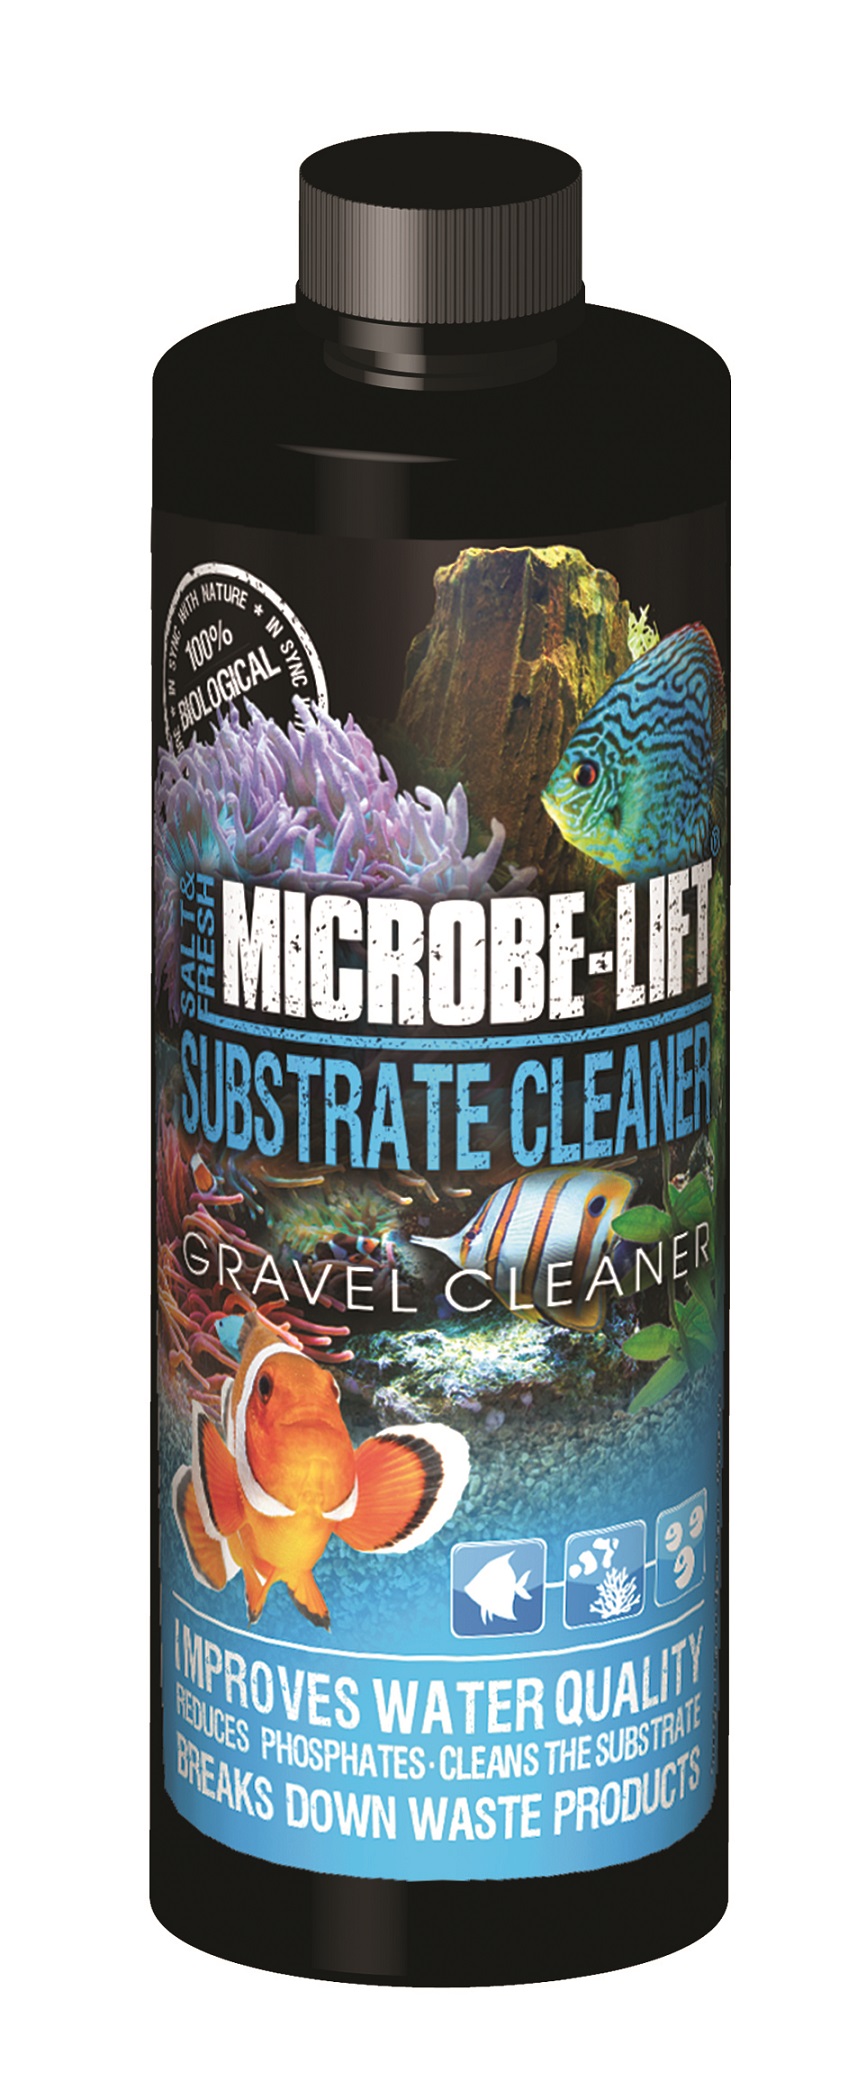 Gravel and Substrate Cleaner